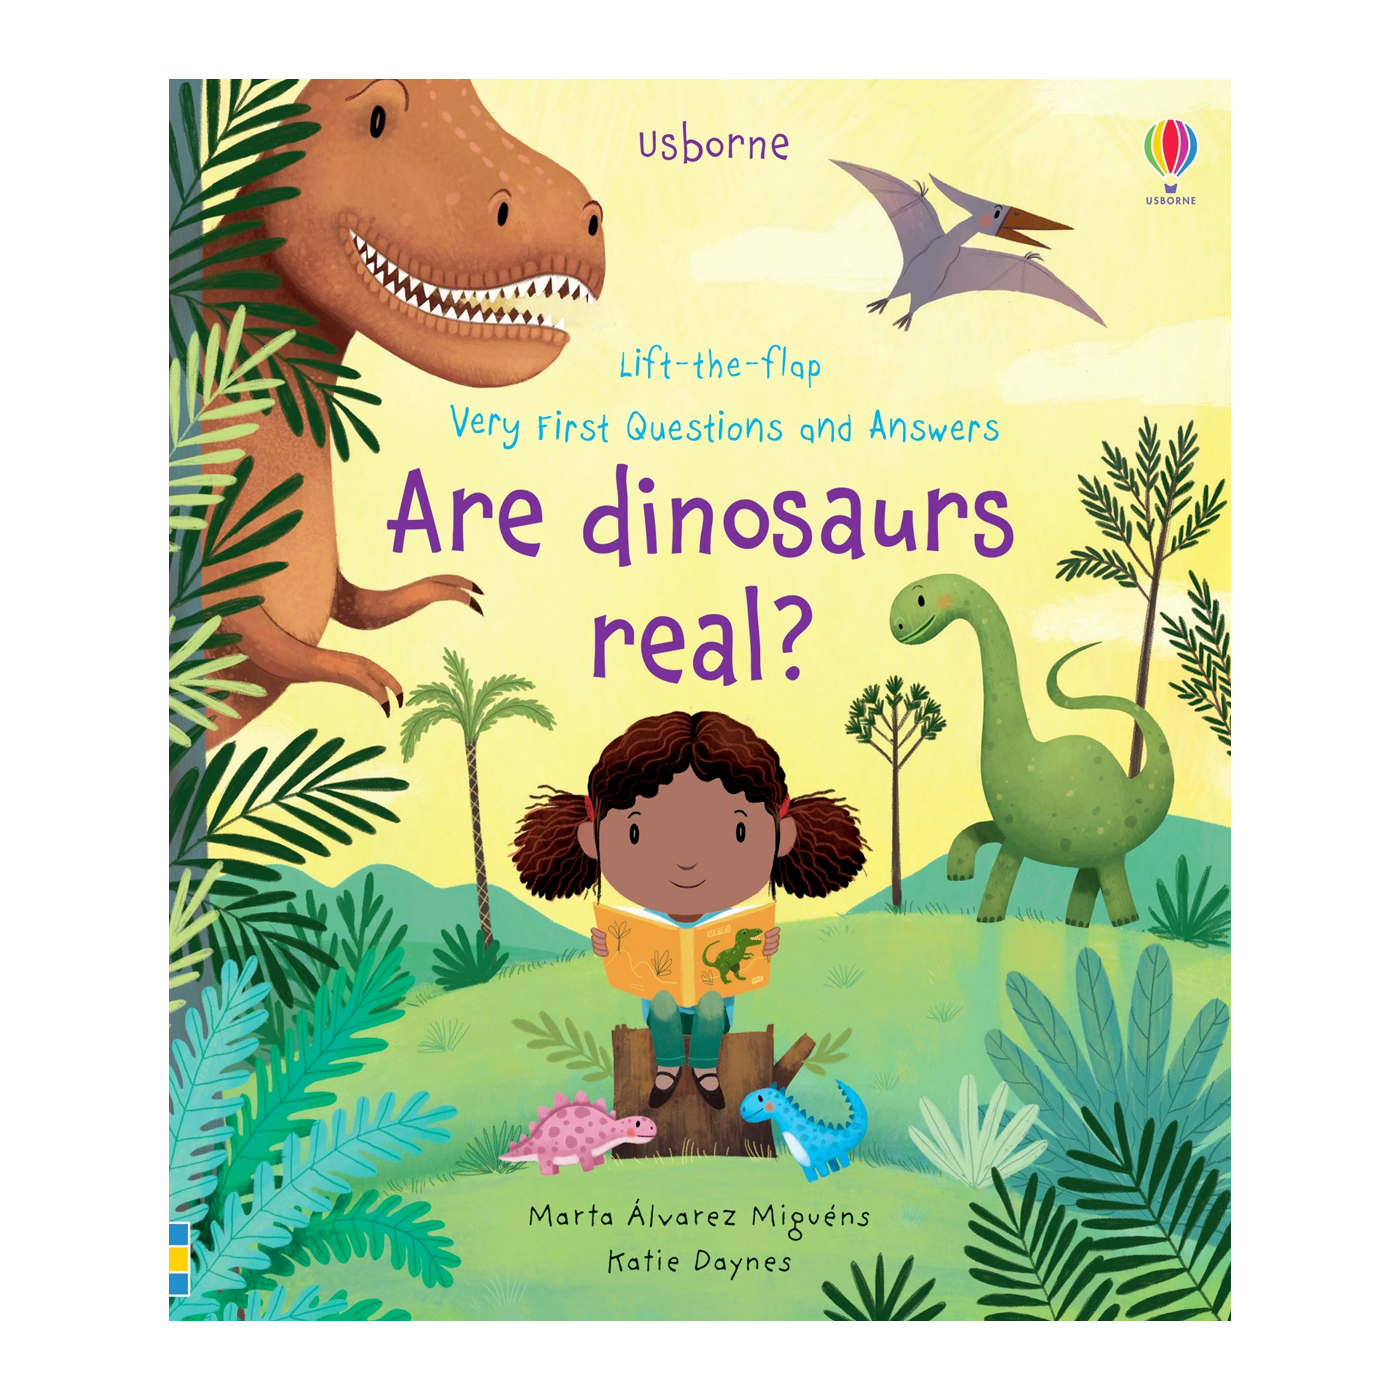  Lift-the-flap Very First Questions and Answers Are Dinosaurs Real?